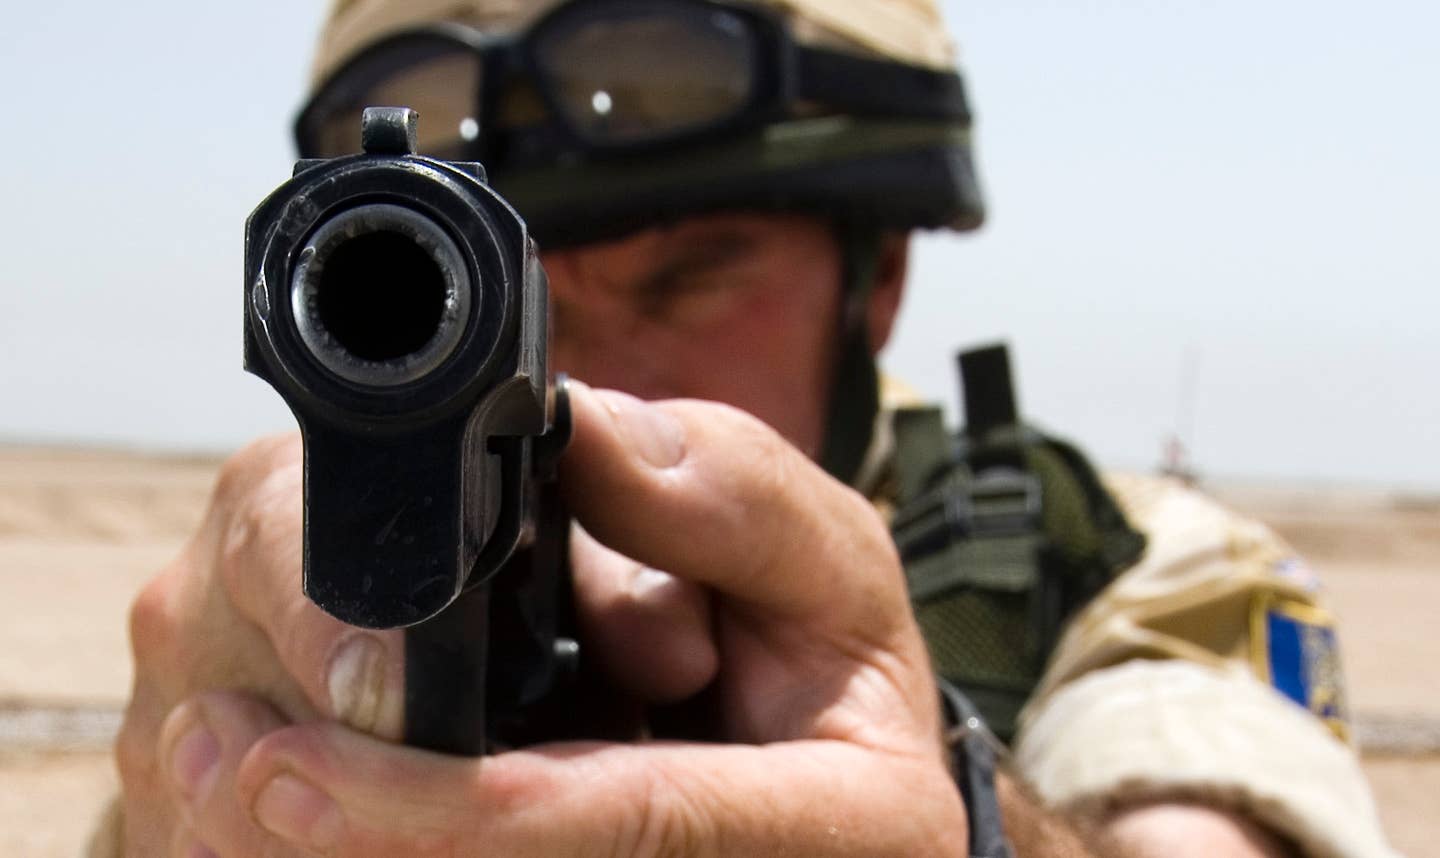 A British soldier aims a Browning Hi-Power 9 mm pistol on a shooting range in Basra, Iraq. (Photo: Ministry of Defense)